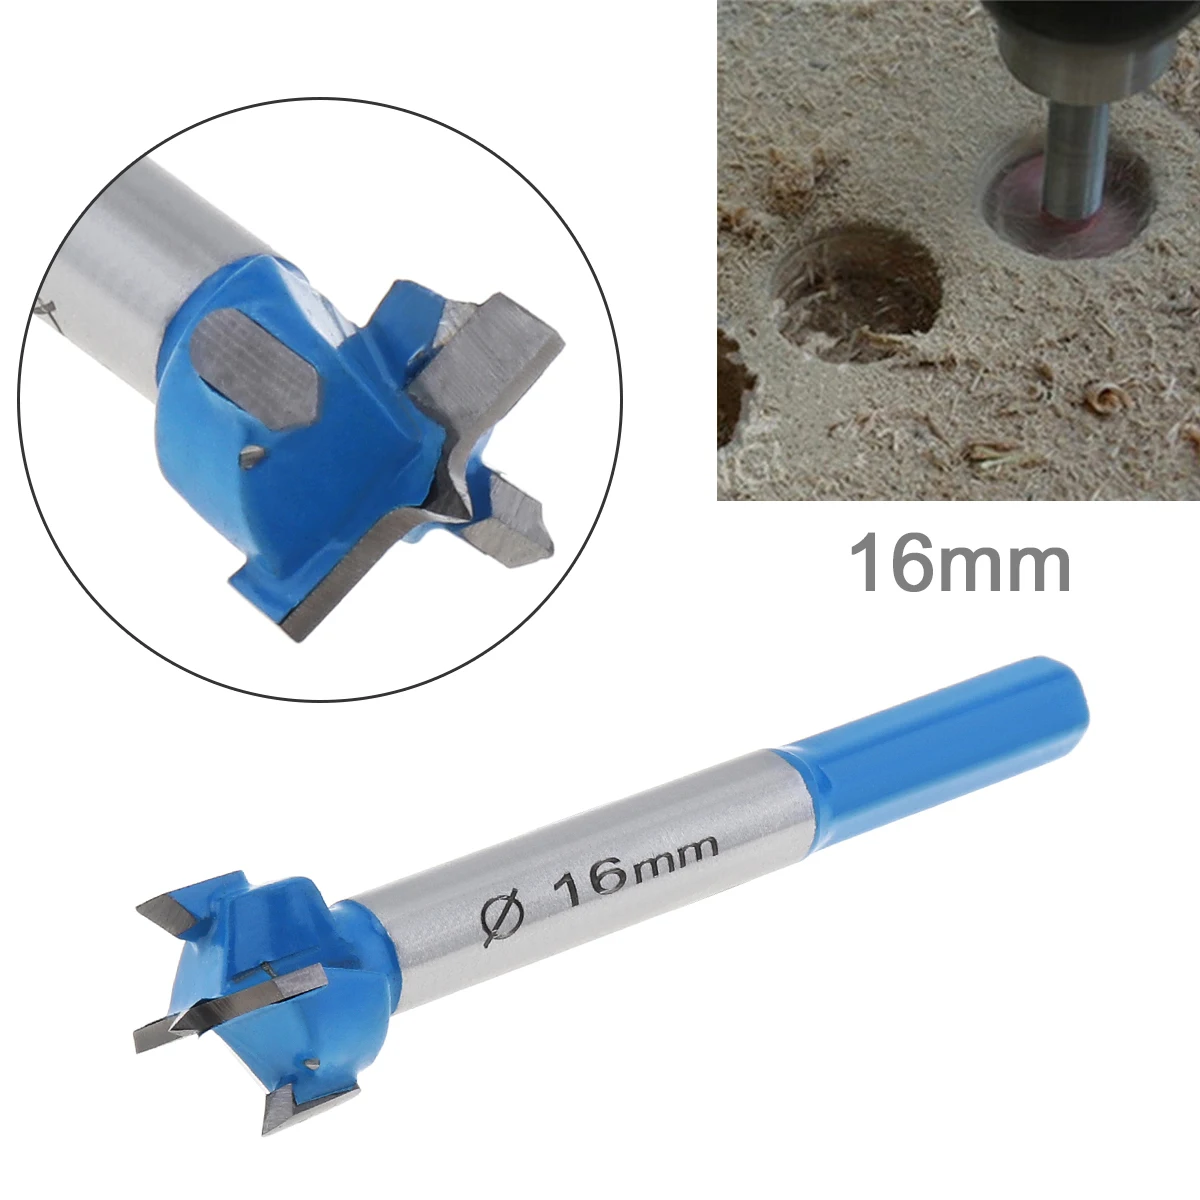 16mm Hole Saw Wood Cutter Woodworking Tool for Wooden Products Perforation Chip Removal Unhindered